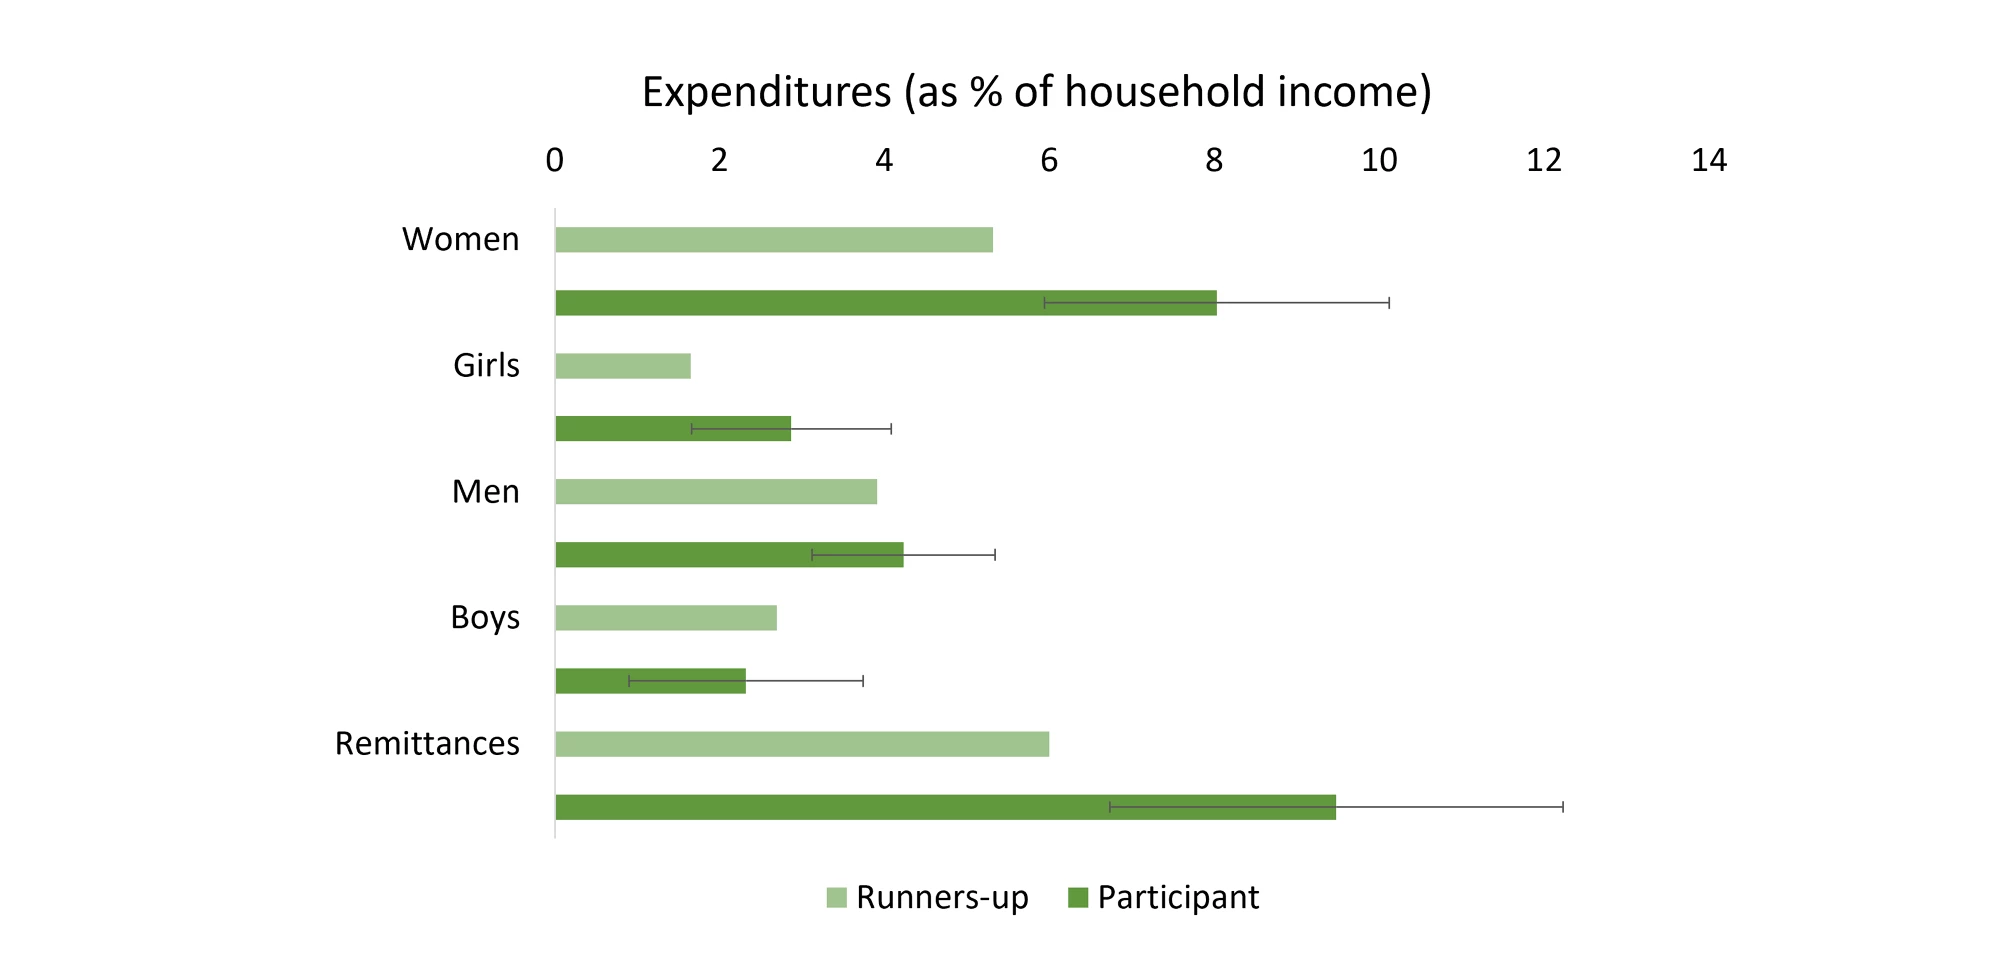 Expenditures (as % of household income)